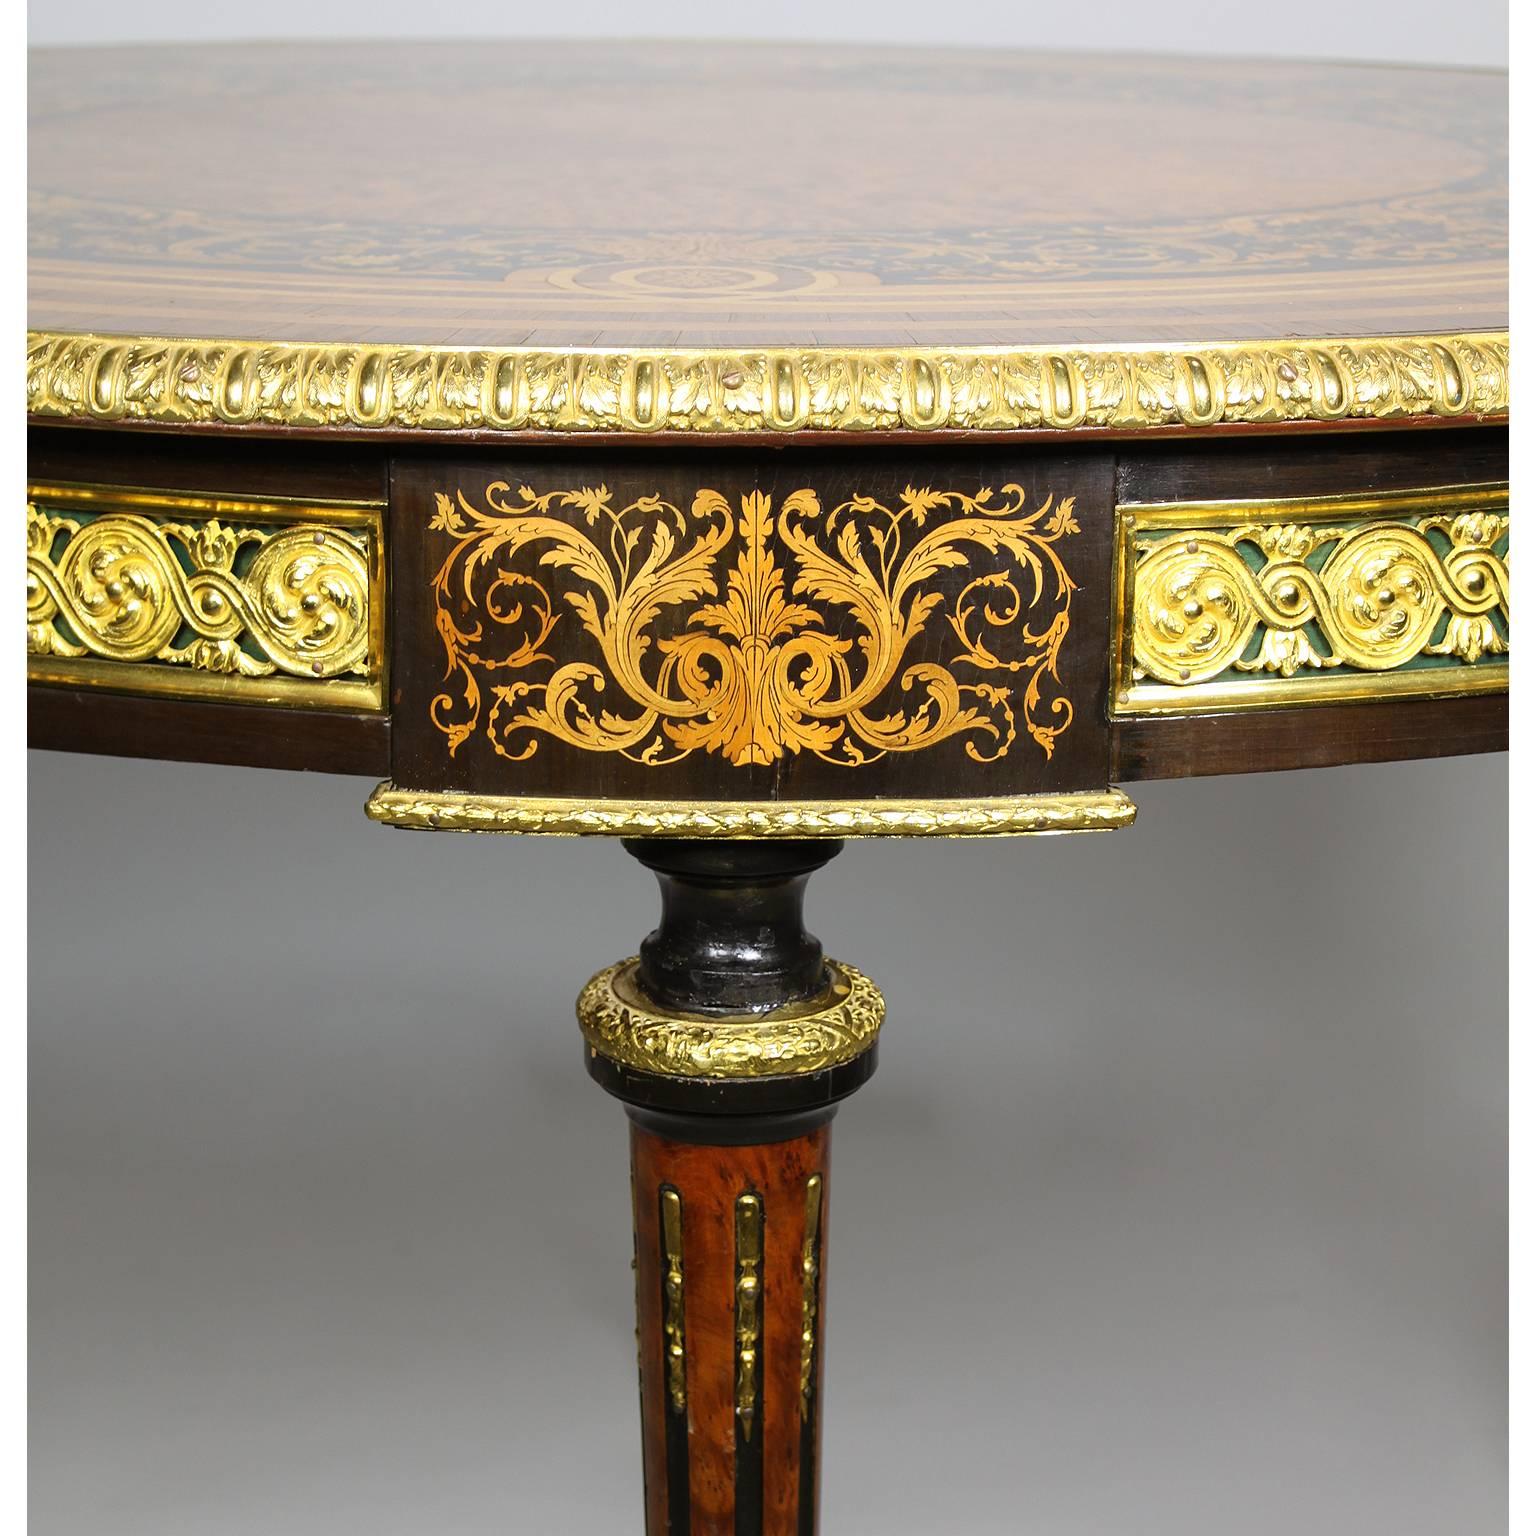 French 19th Century Louis XVI Style Gilt-Bronze Mounted Marquetry Center Table For Sale 2